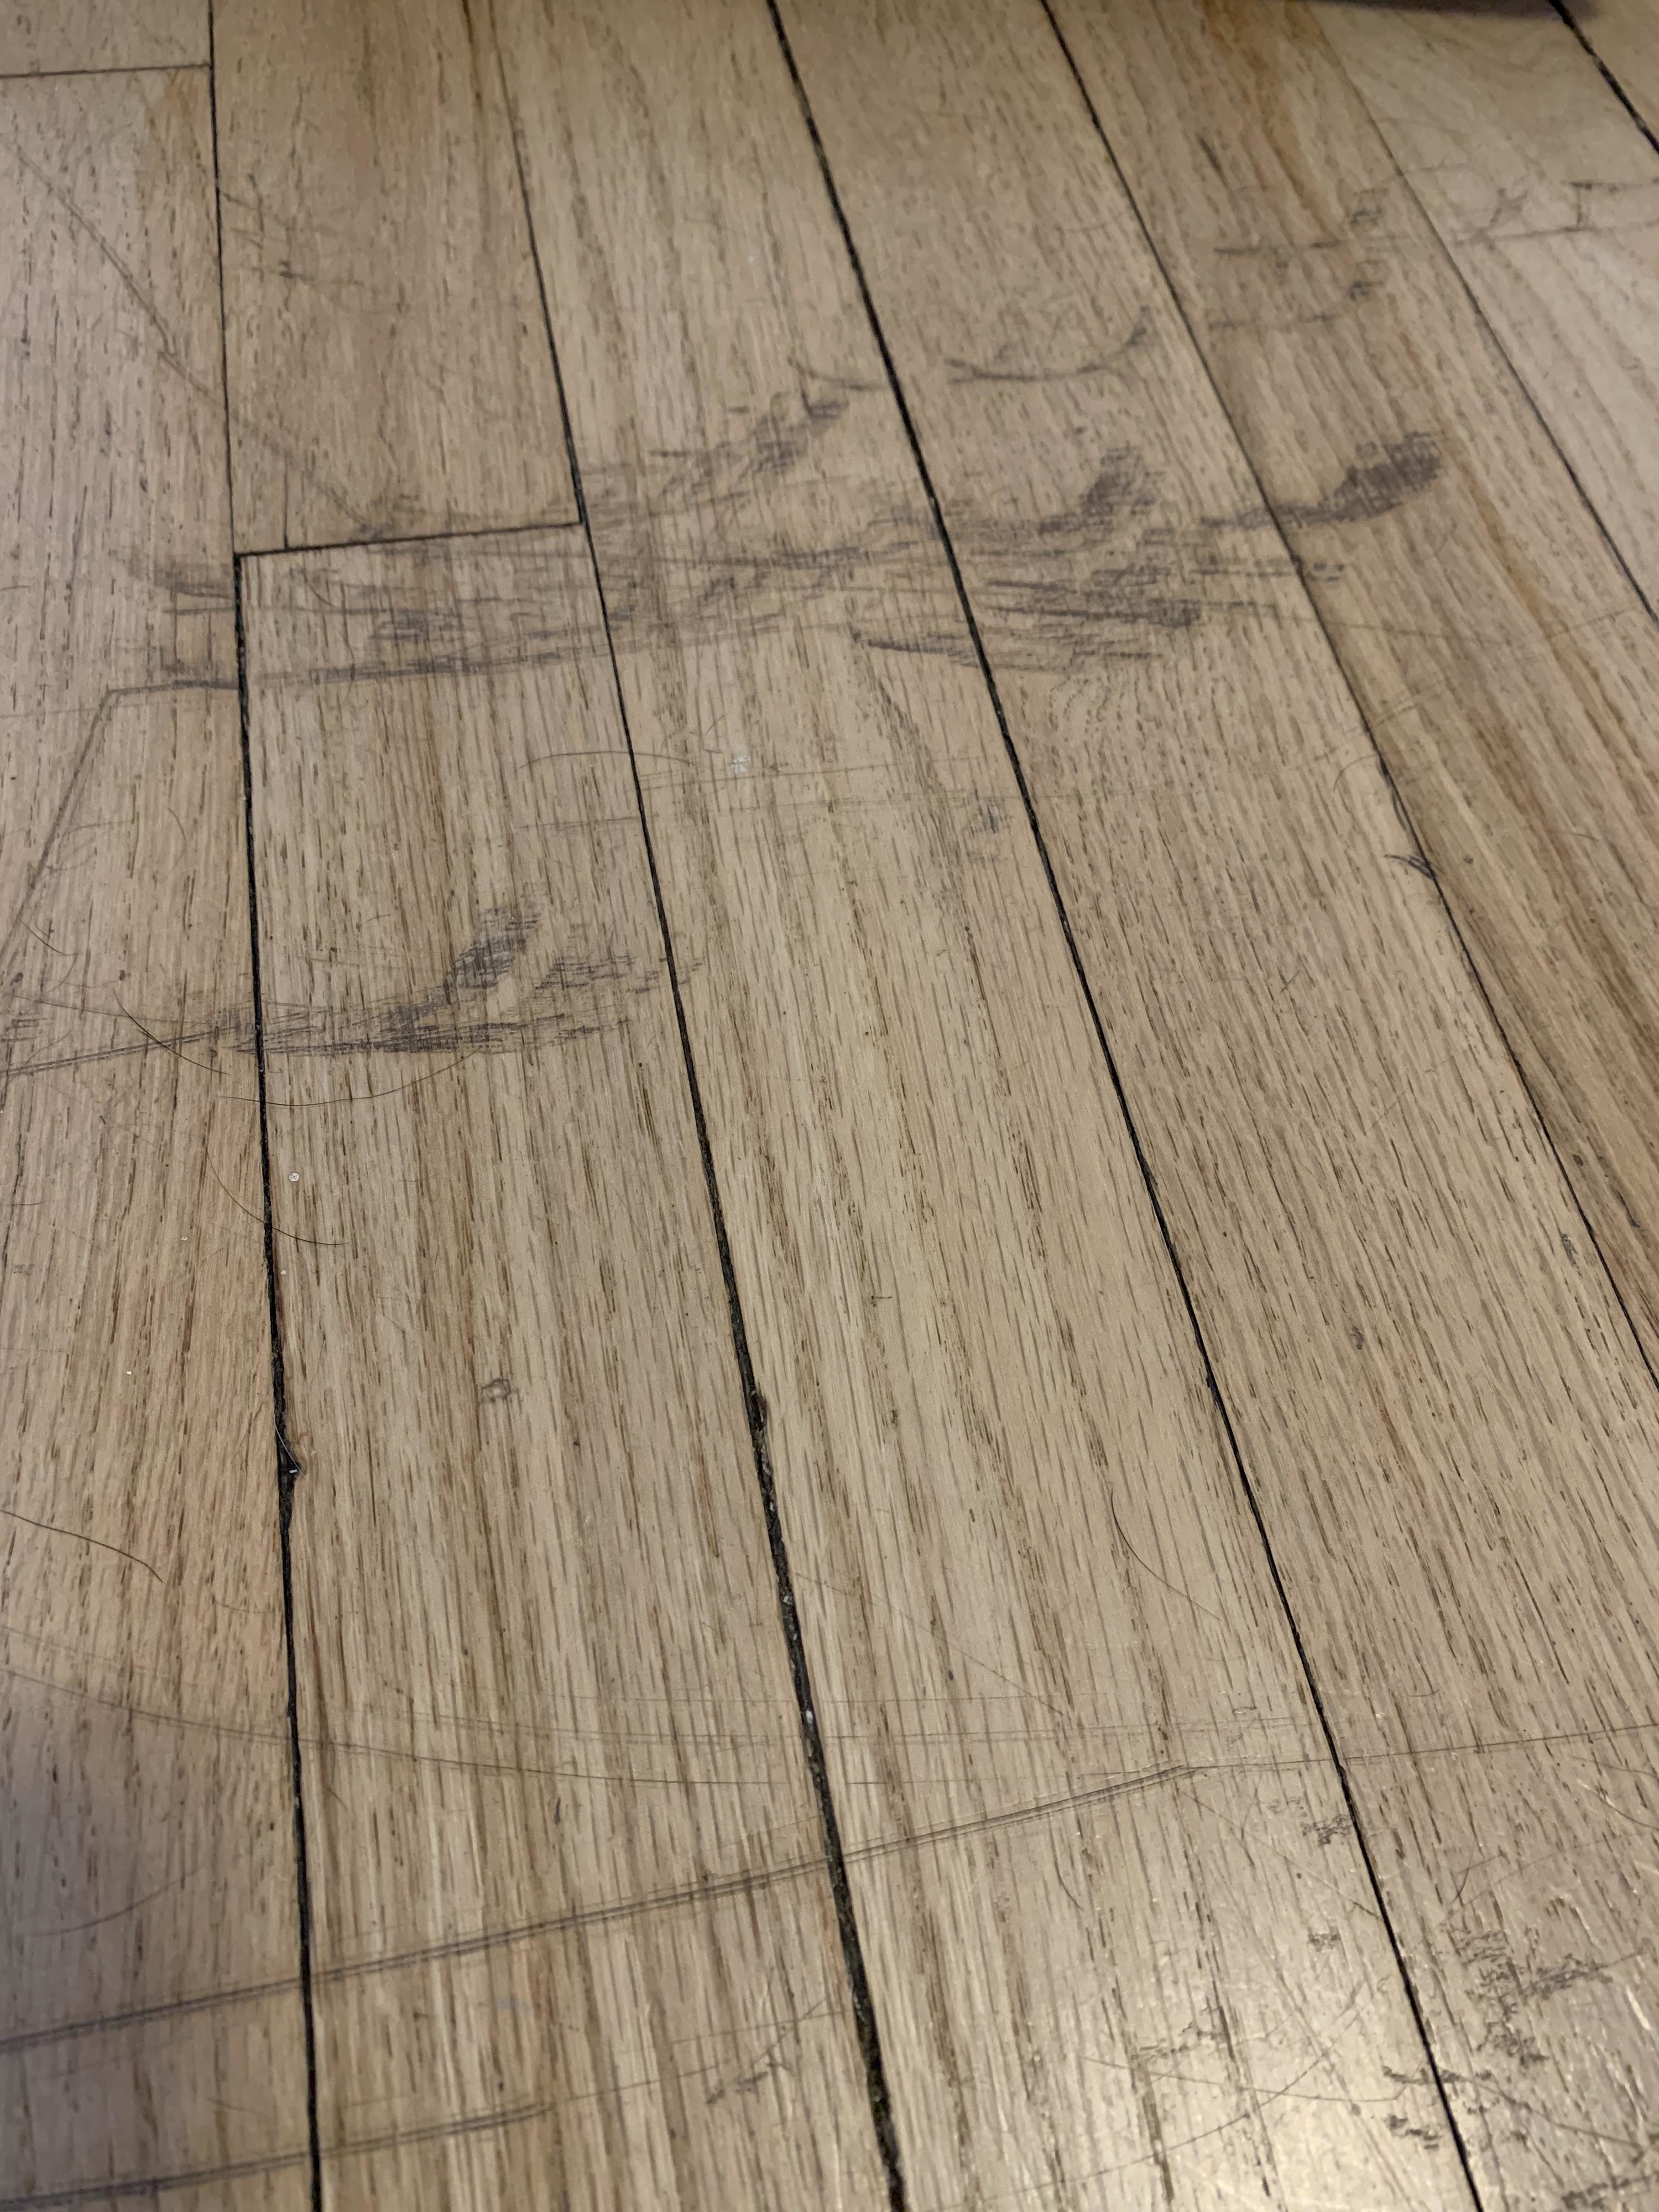 scratches all over wood flooring